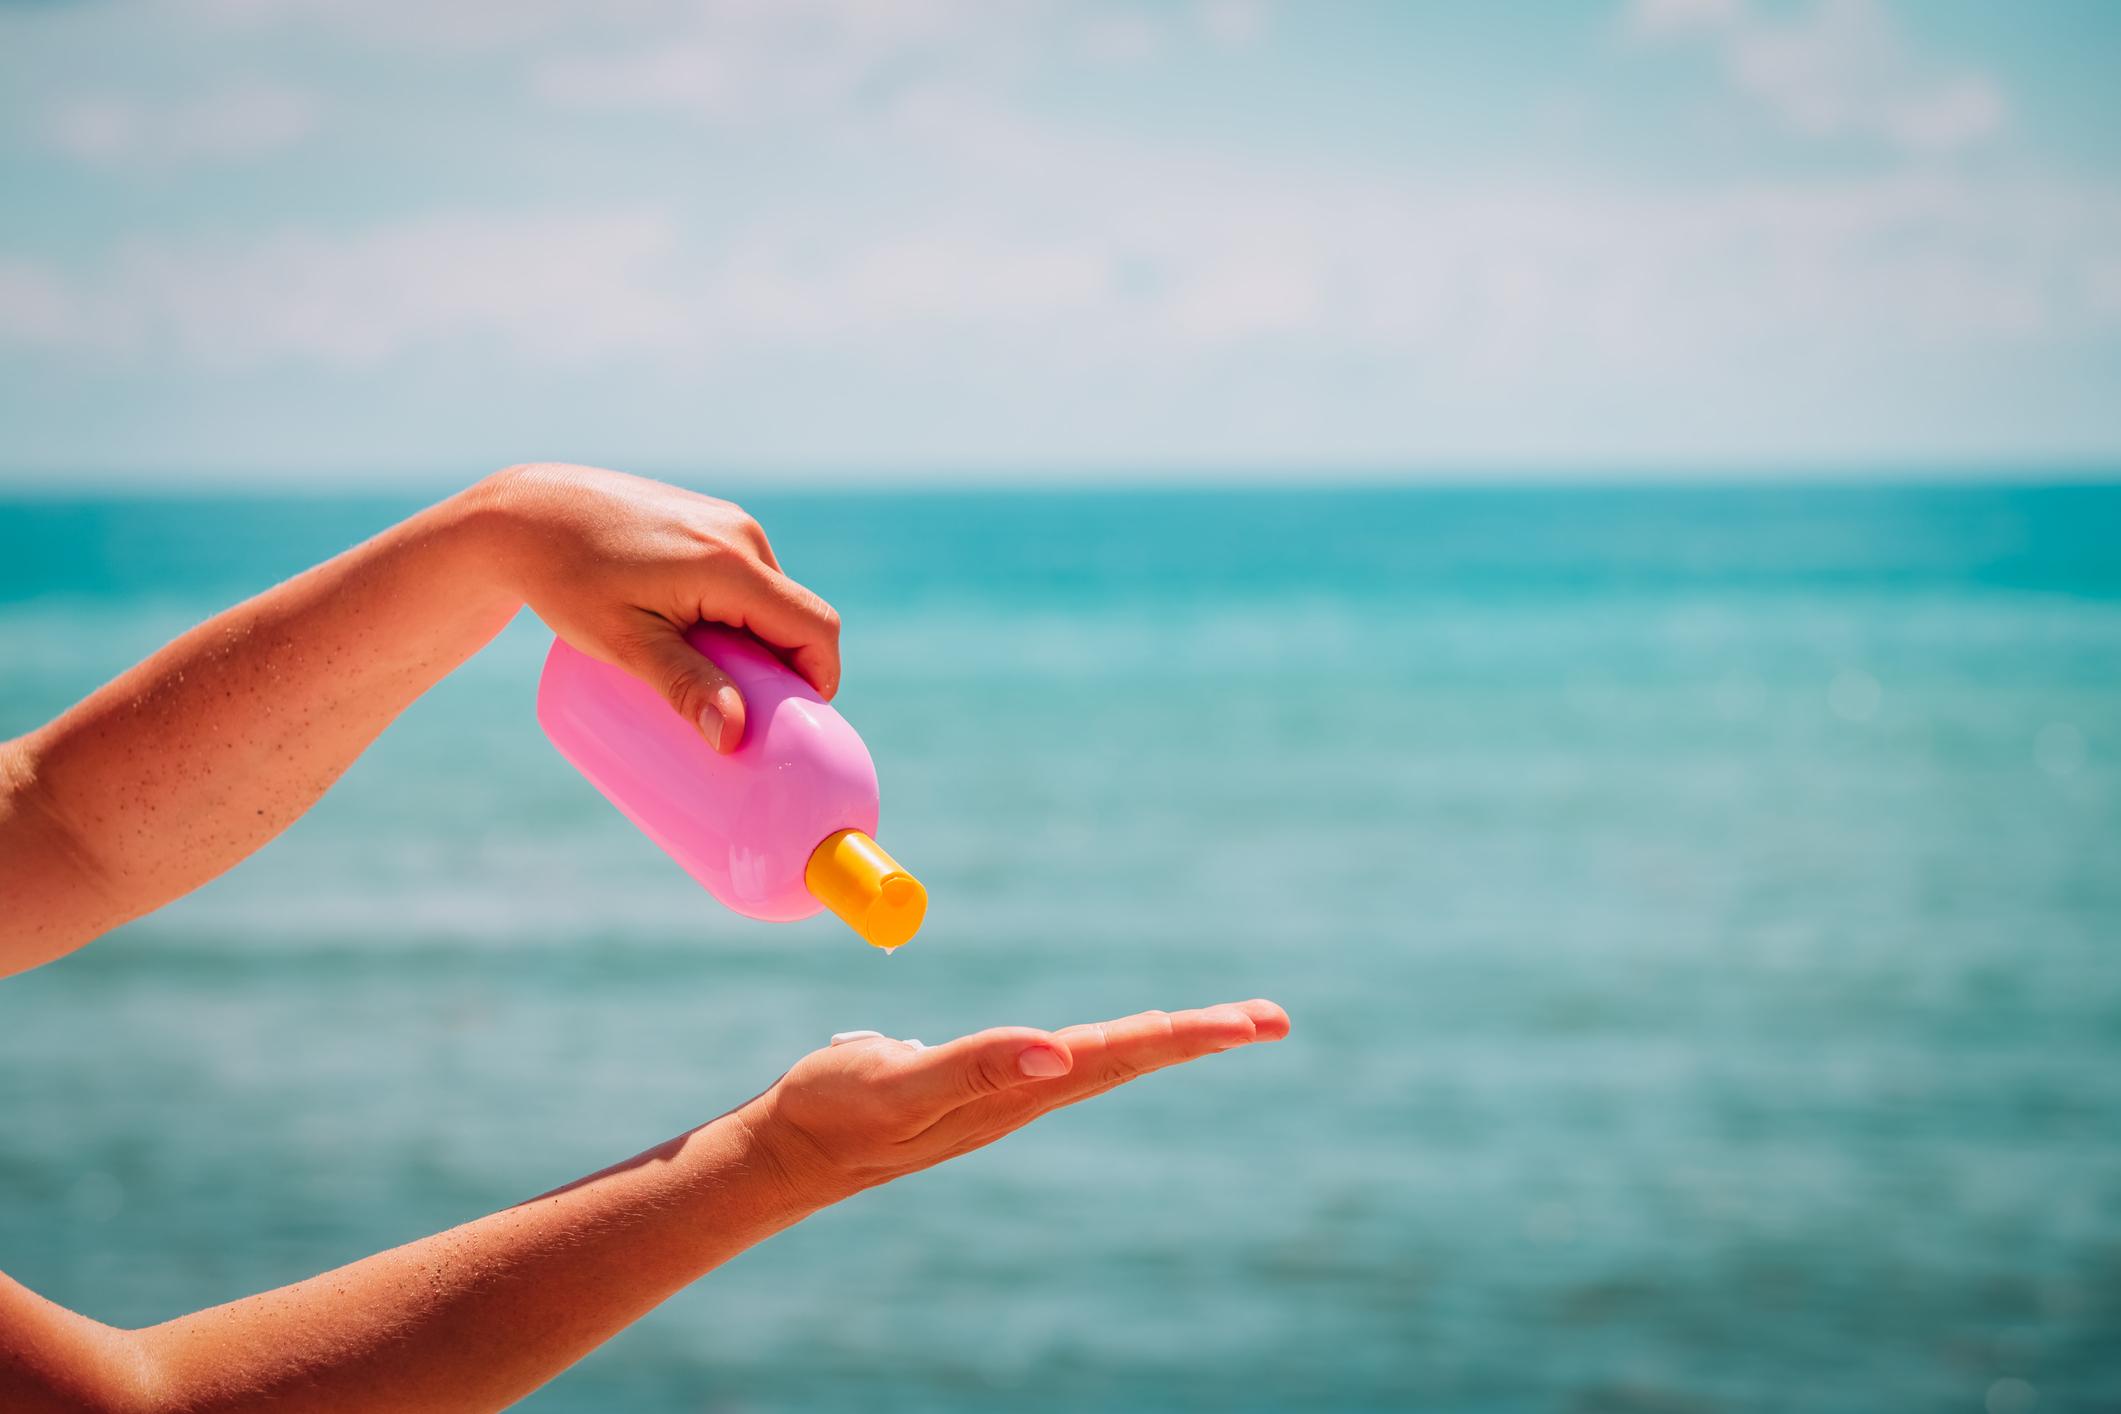 What The World’s Top Dermatologists Want You to Know About Sunscreen